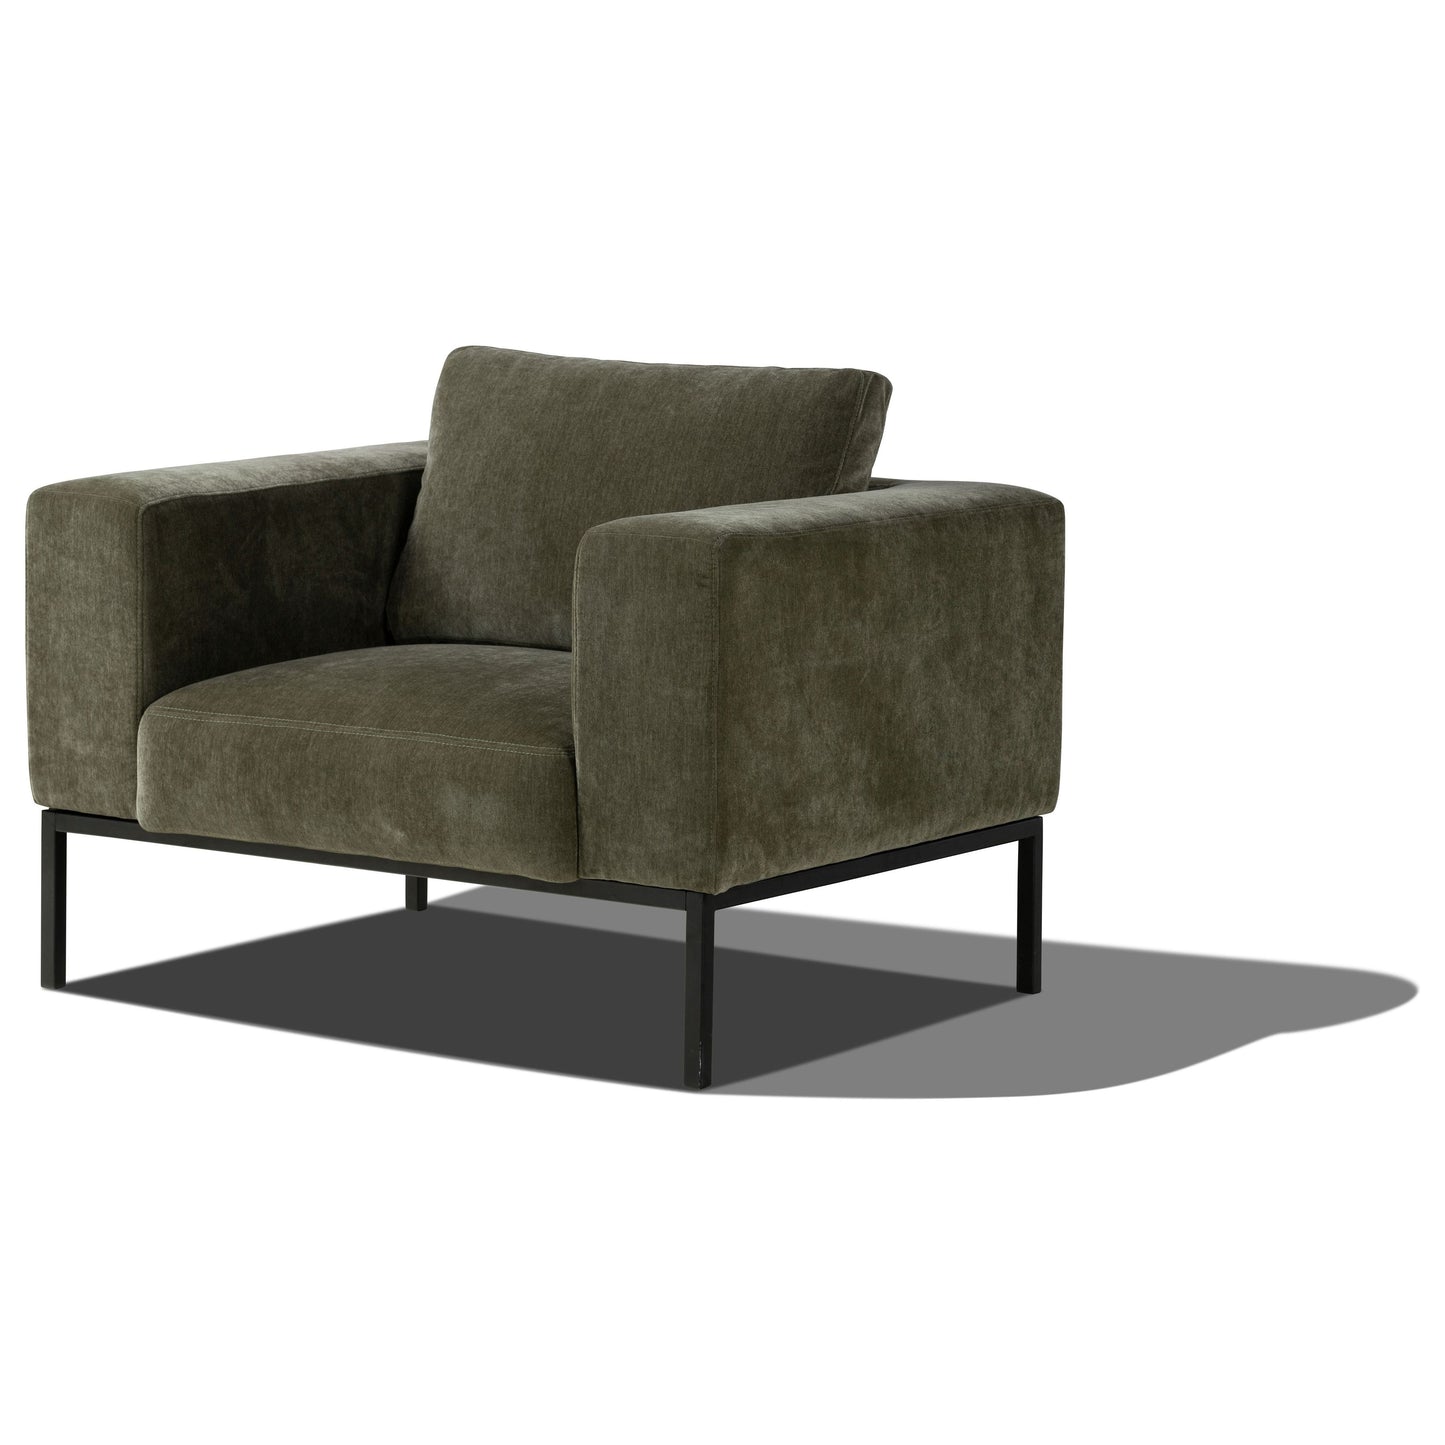 A Stewart Accent Chair with a contemporary aesthetic olive green chenille fabric, sleek black metal frame, and square design, isolated on a white background.